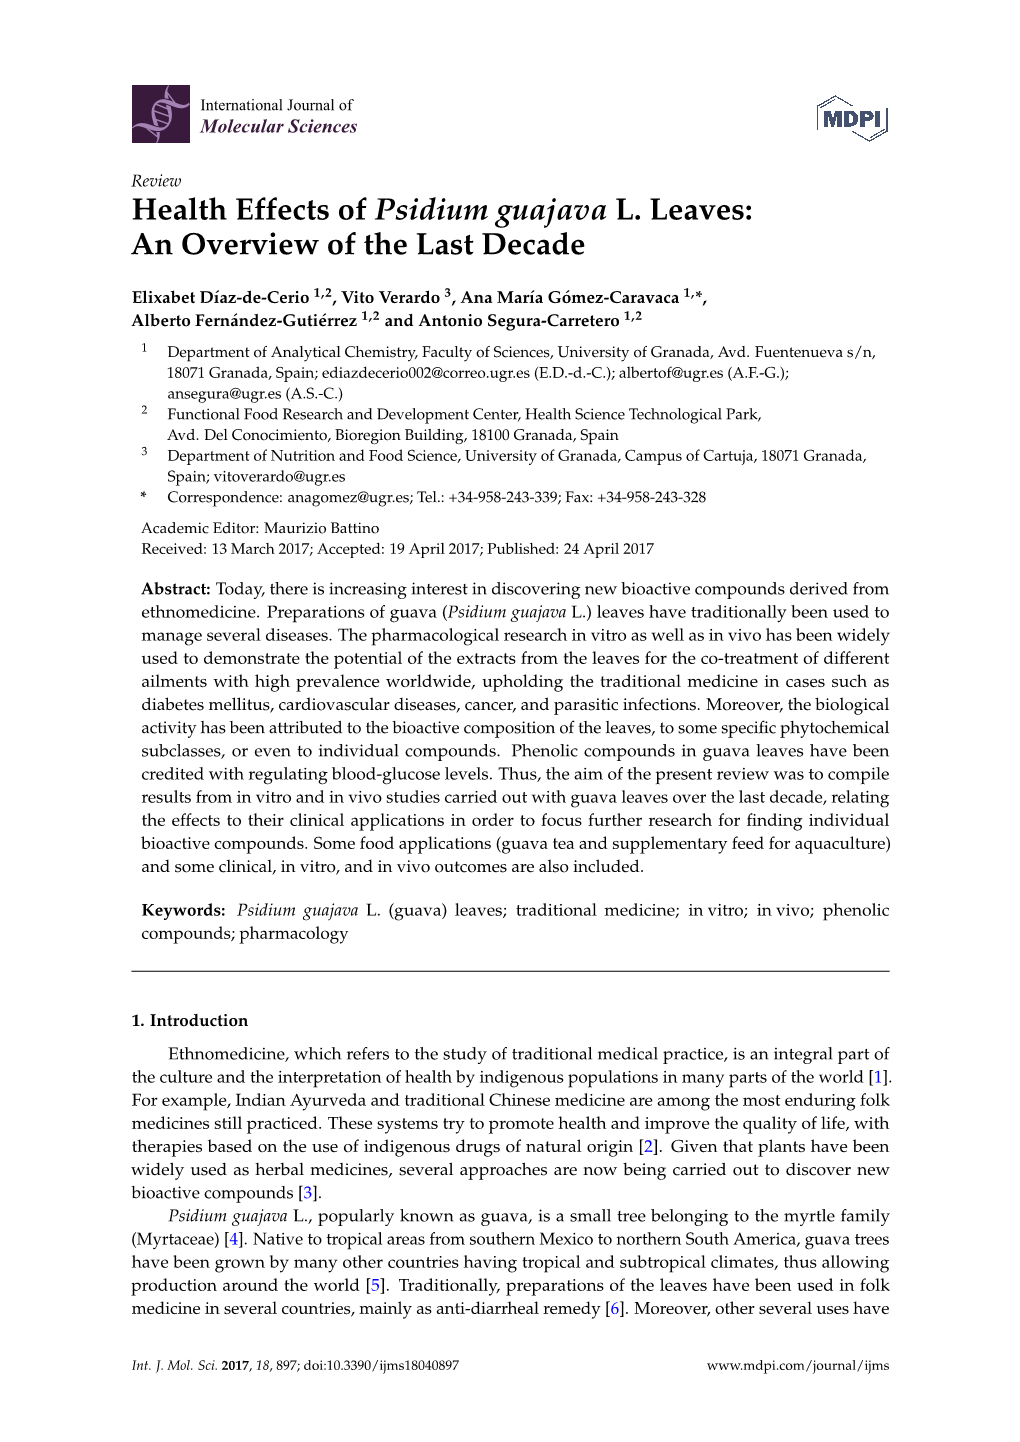 Health Effects of Psidium Guajava L. Leaves: an Overview of the Last Decade